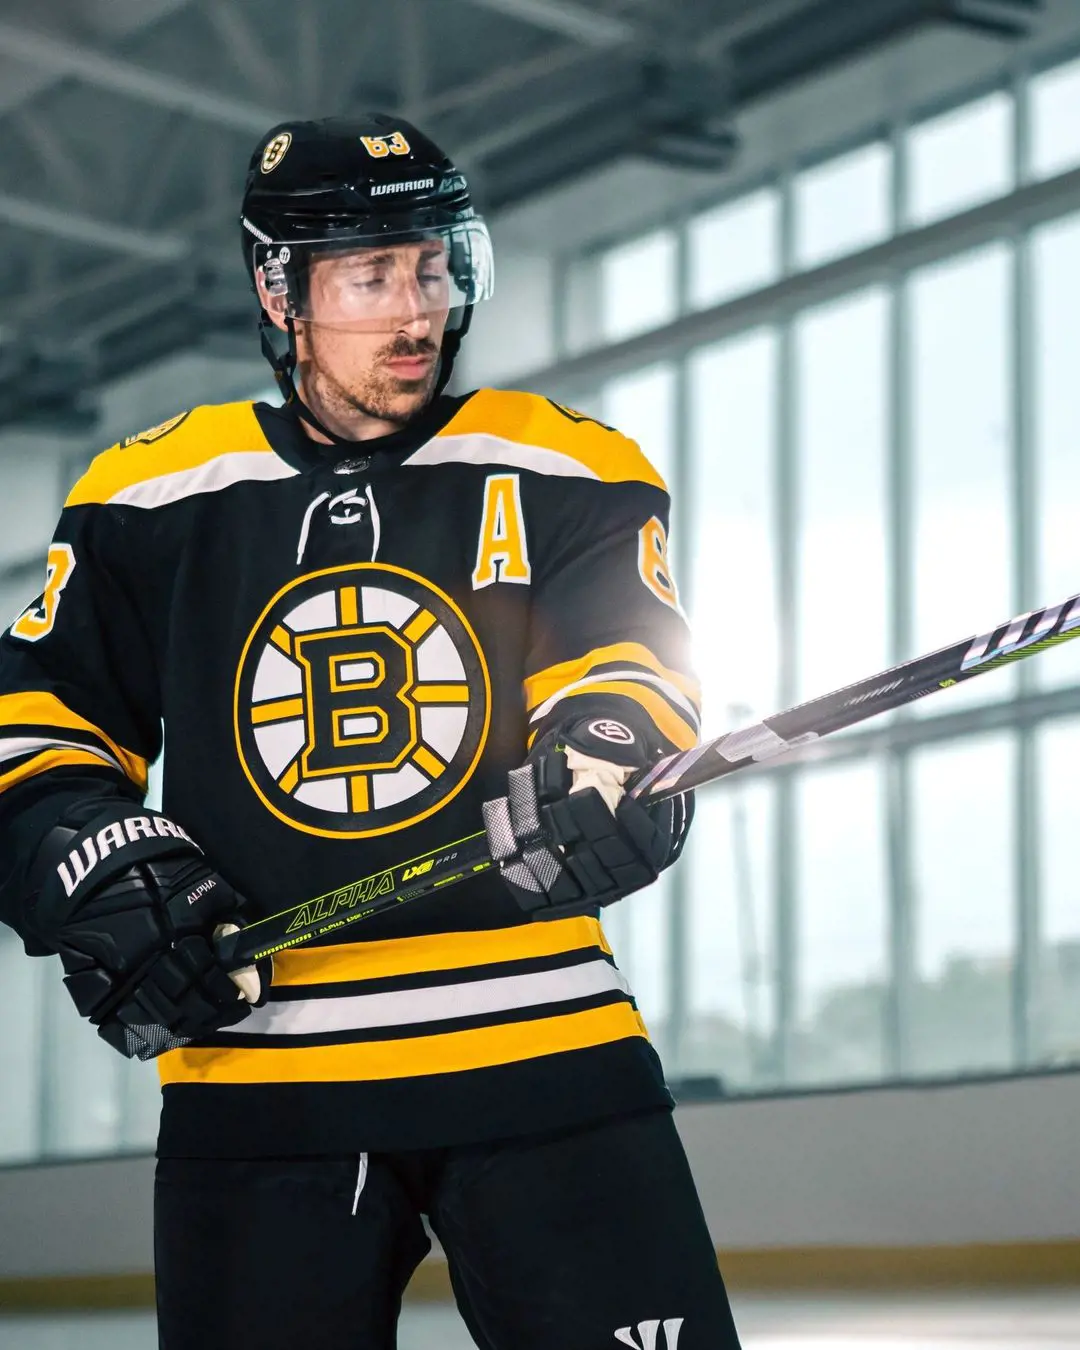 Brad Marchand was drafted by the Bruins in 2006